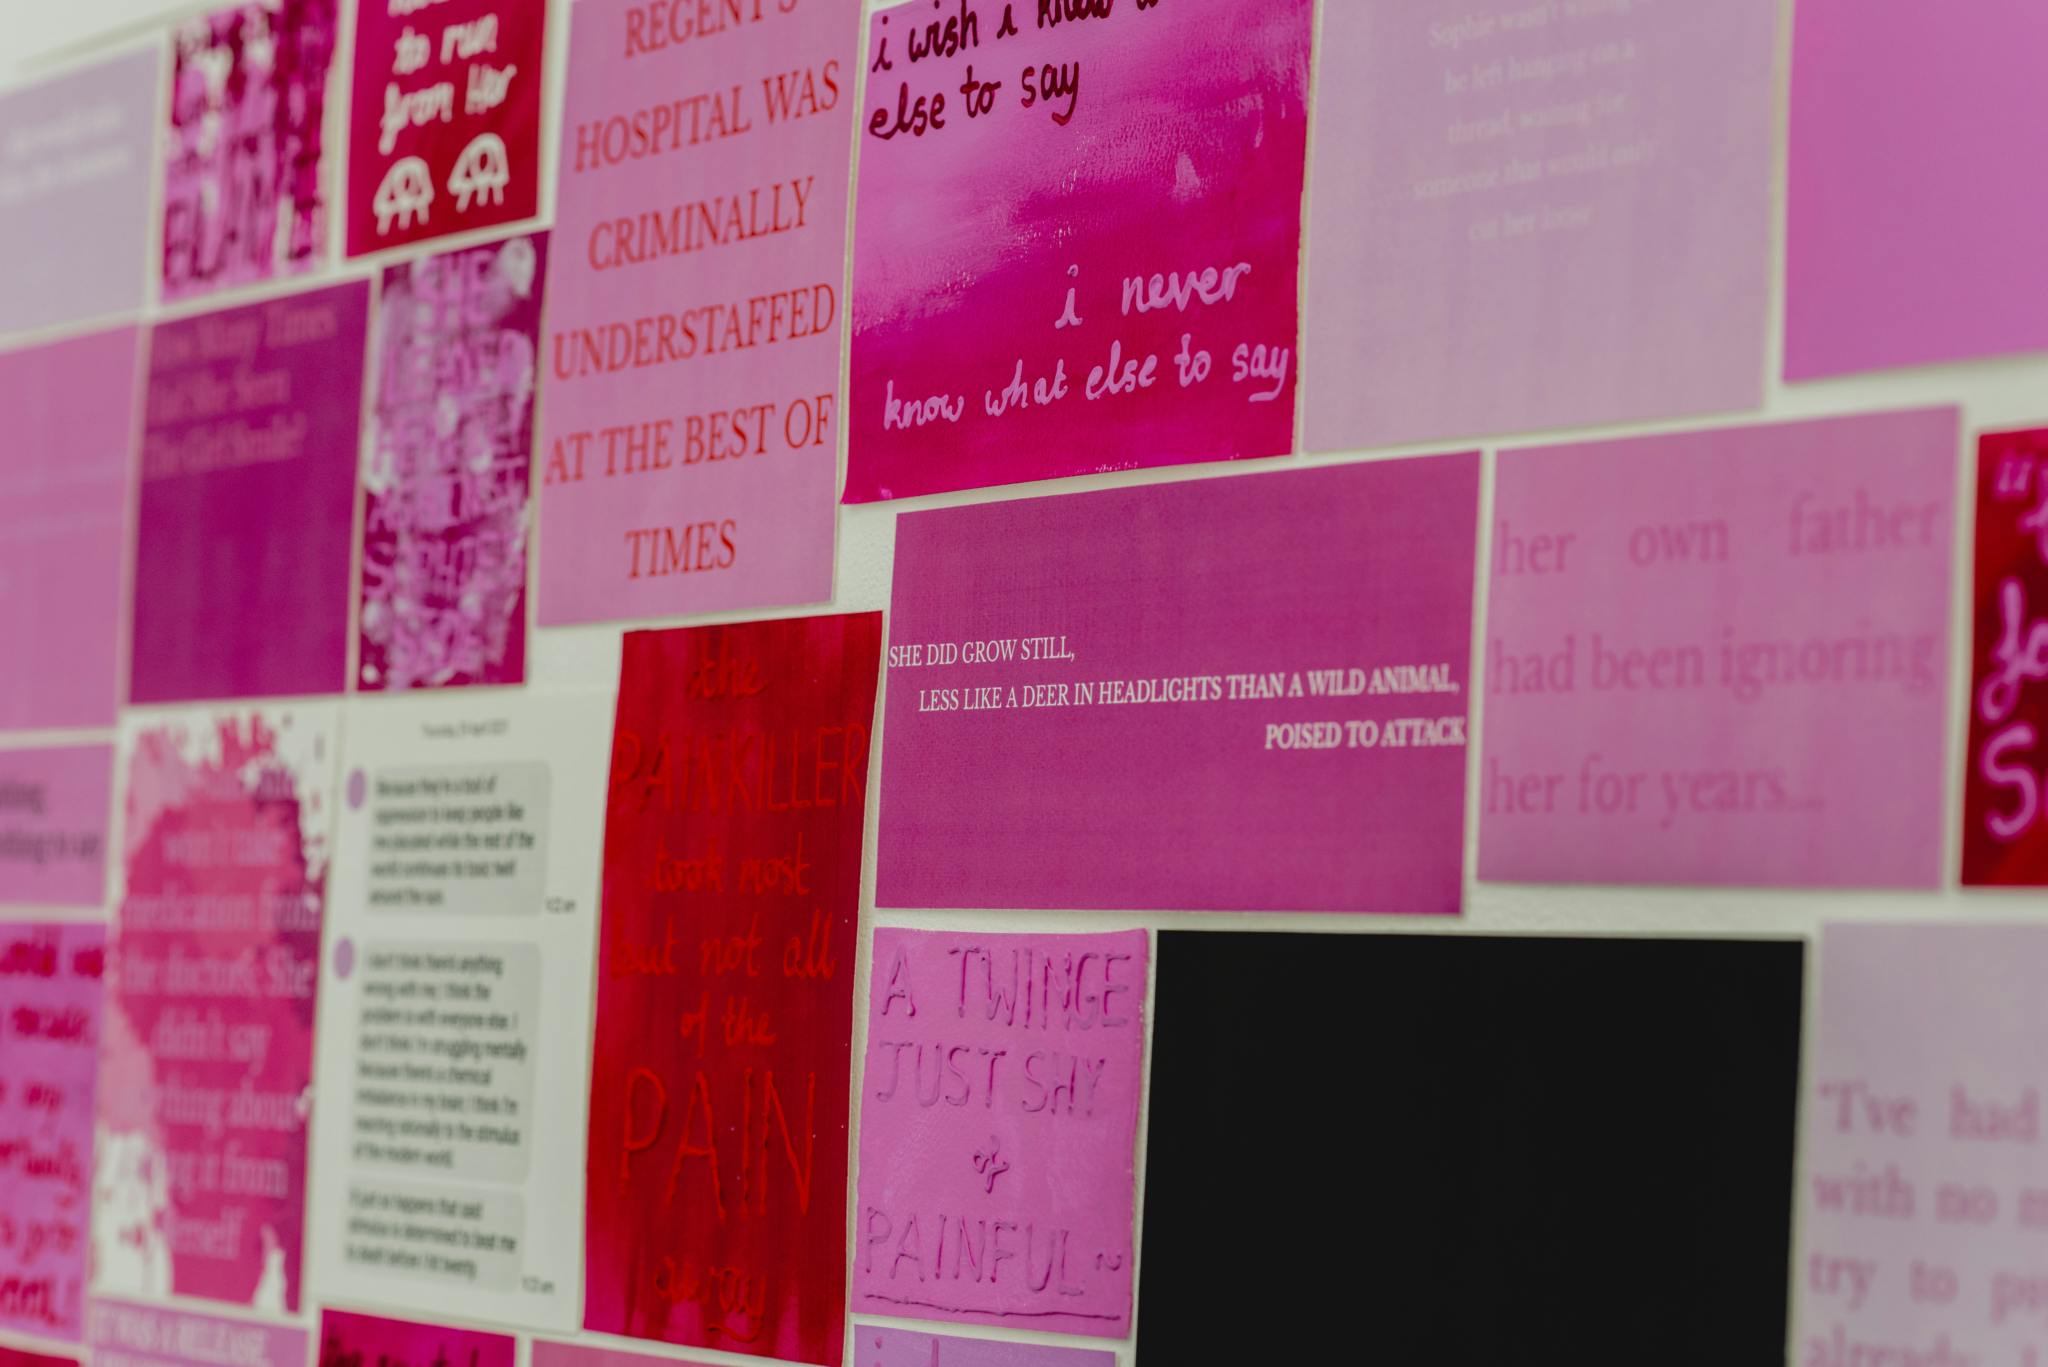 Image shows a wall featuring a number of pink images and quotes